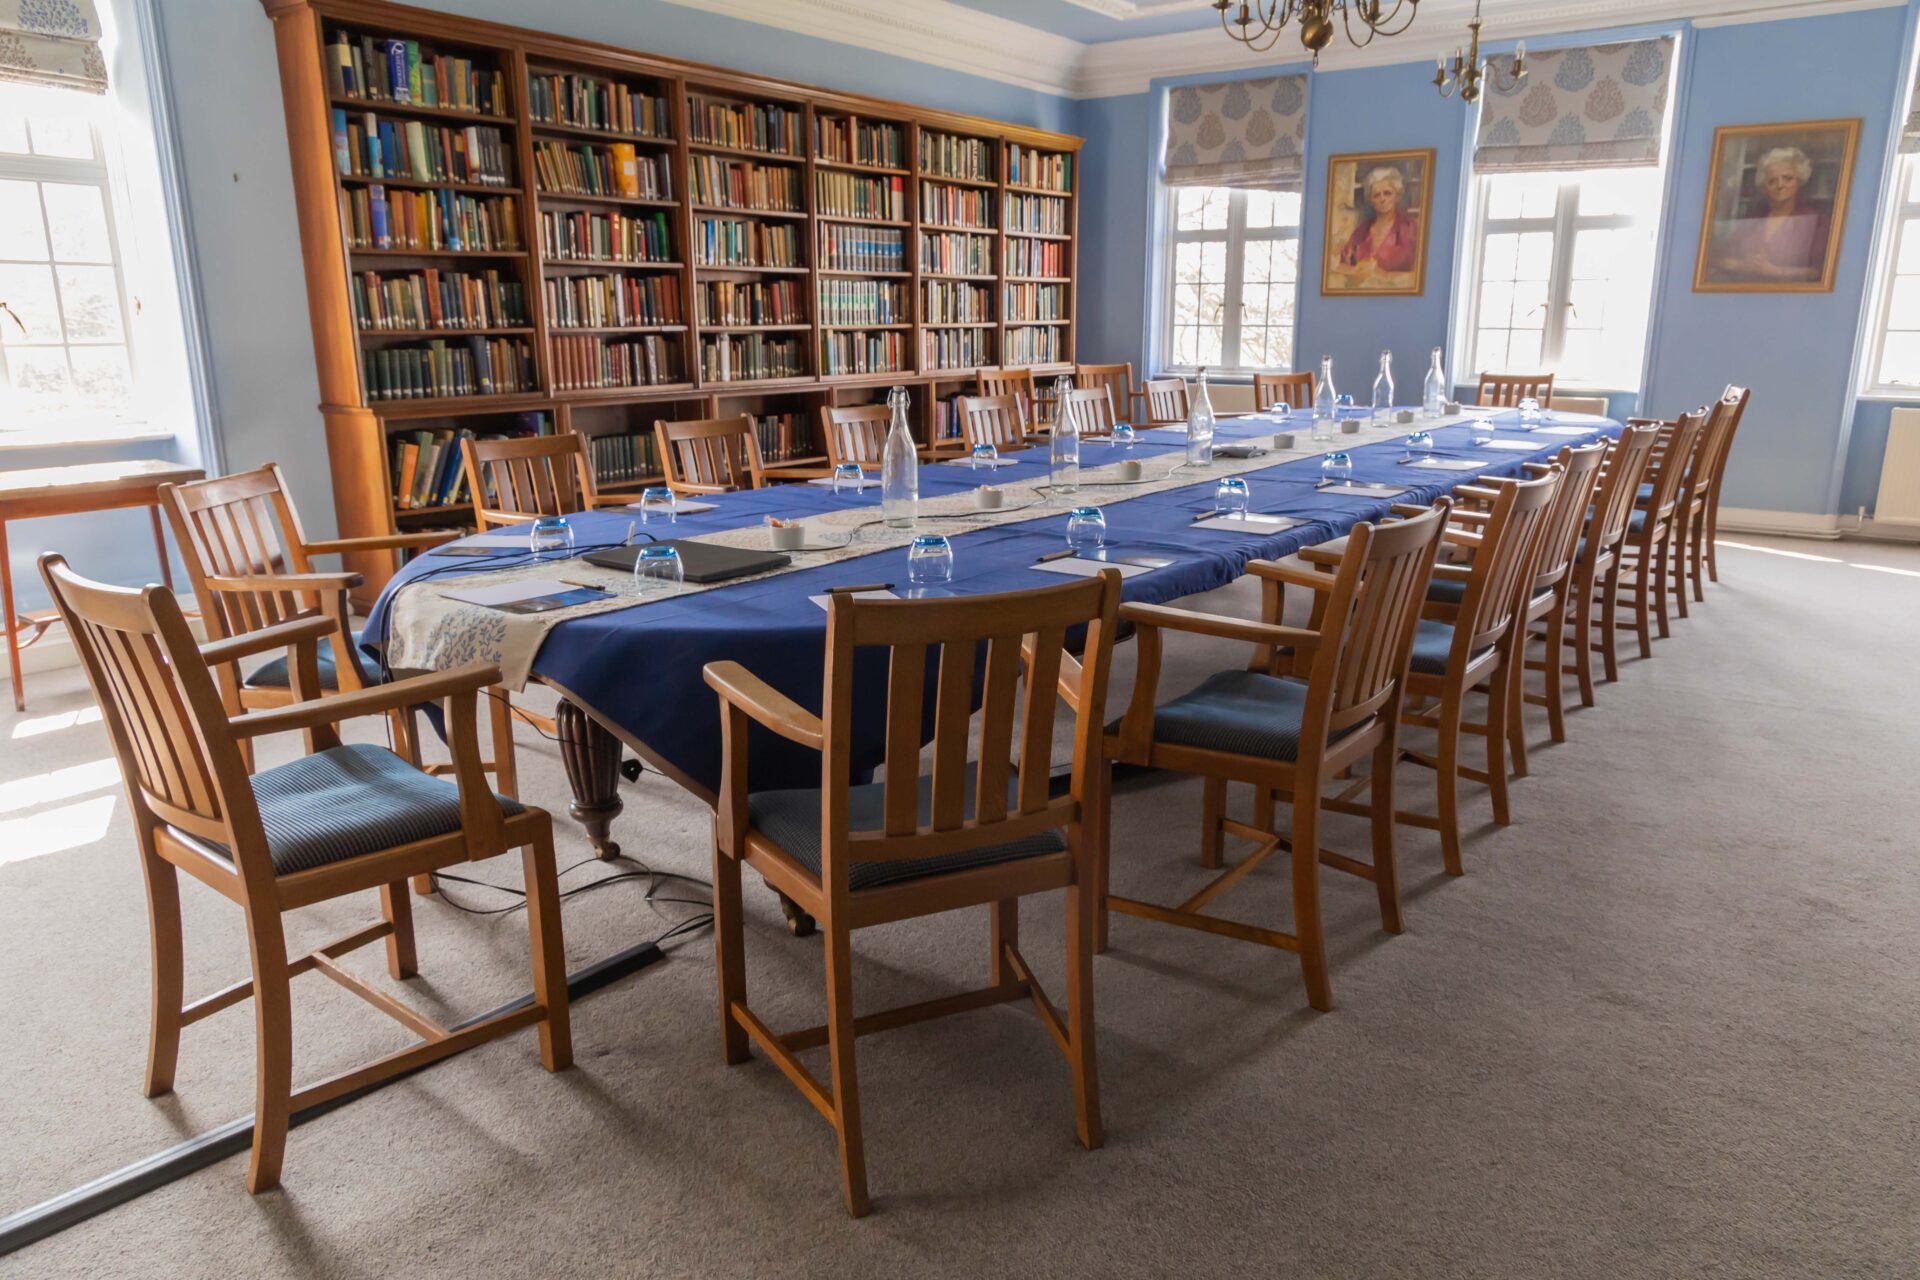 The Amy Buller Library in Cumberland Lodge, set up to accommodate 20 guests